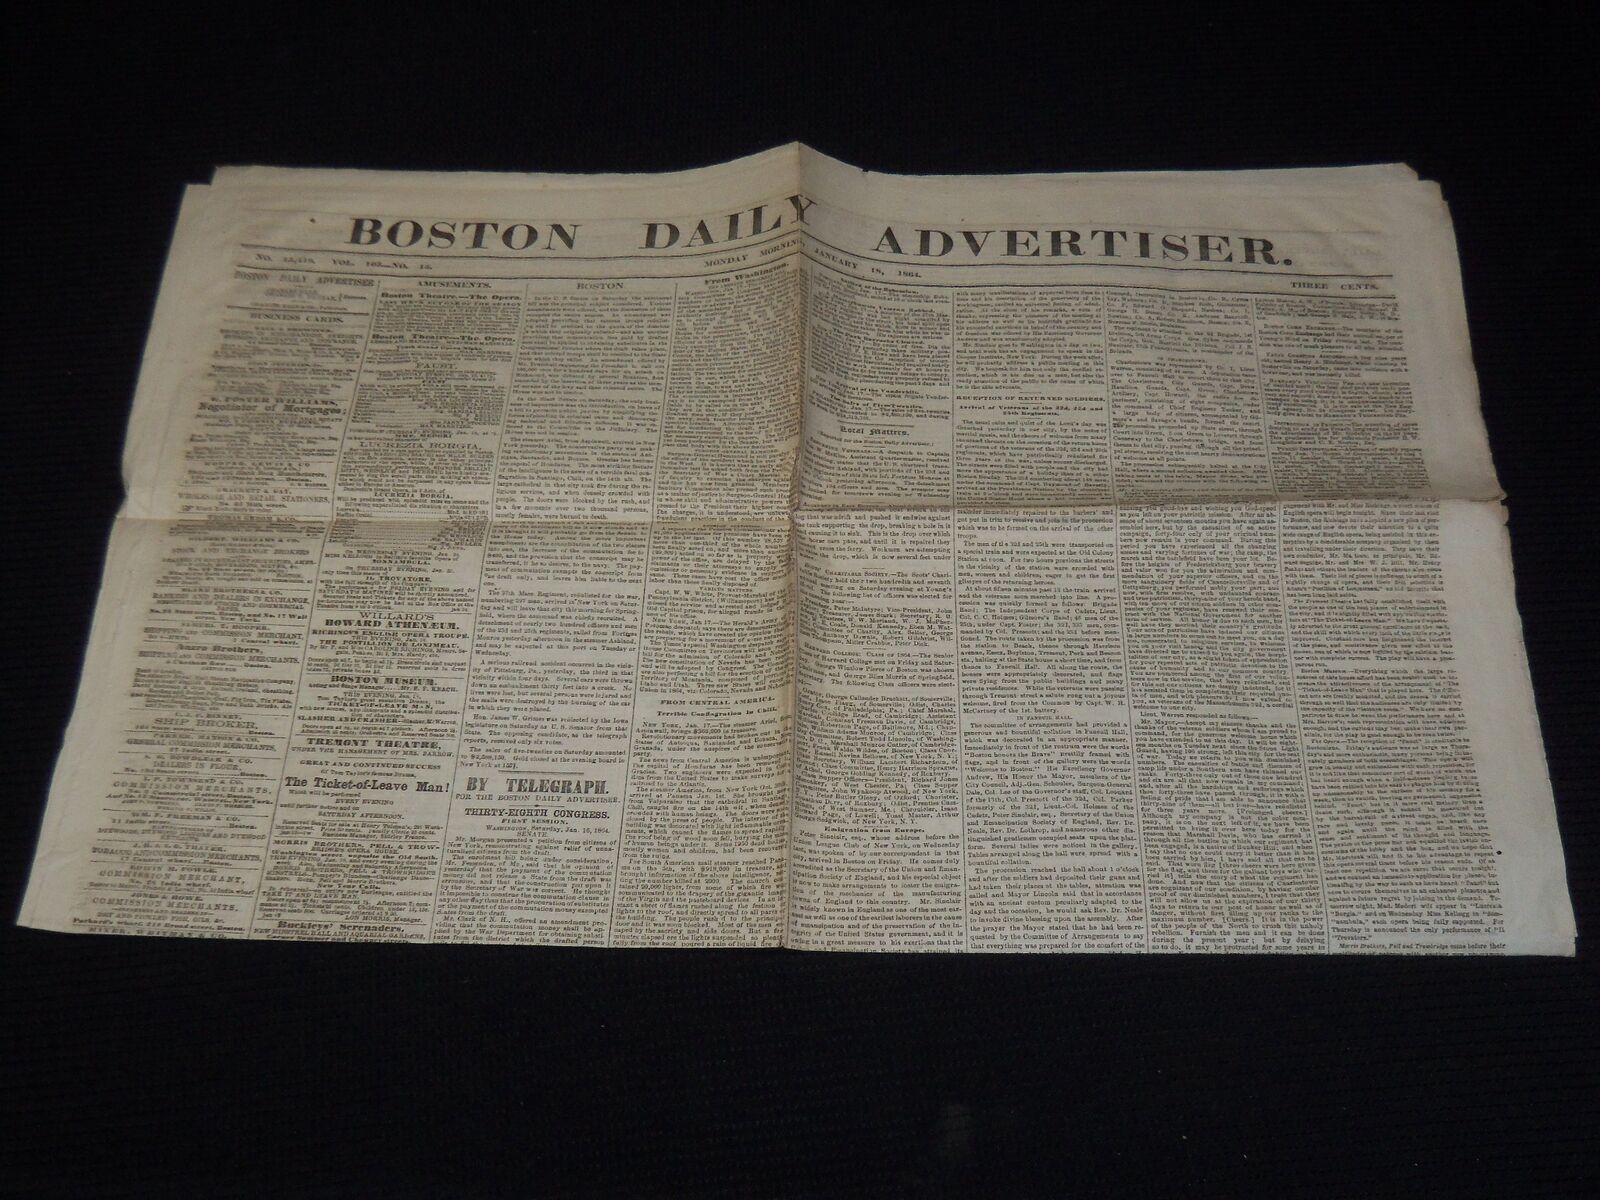 1864 JANUARY 18 BOSTON DAILY ADVERTISER NEWSPAPER - TRUMBULL REQUEST - NP 3878I